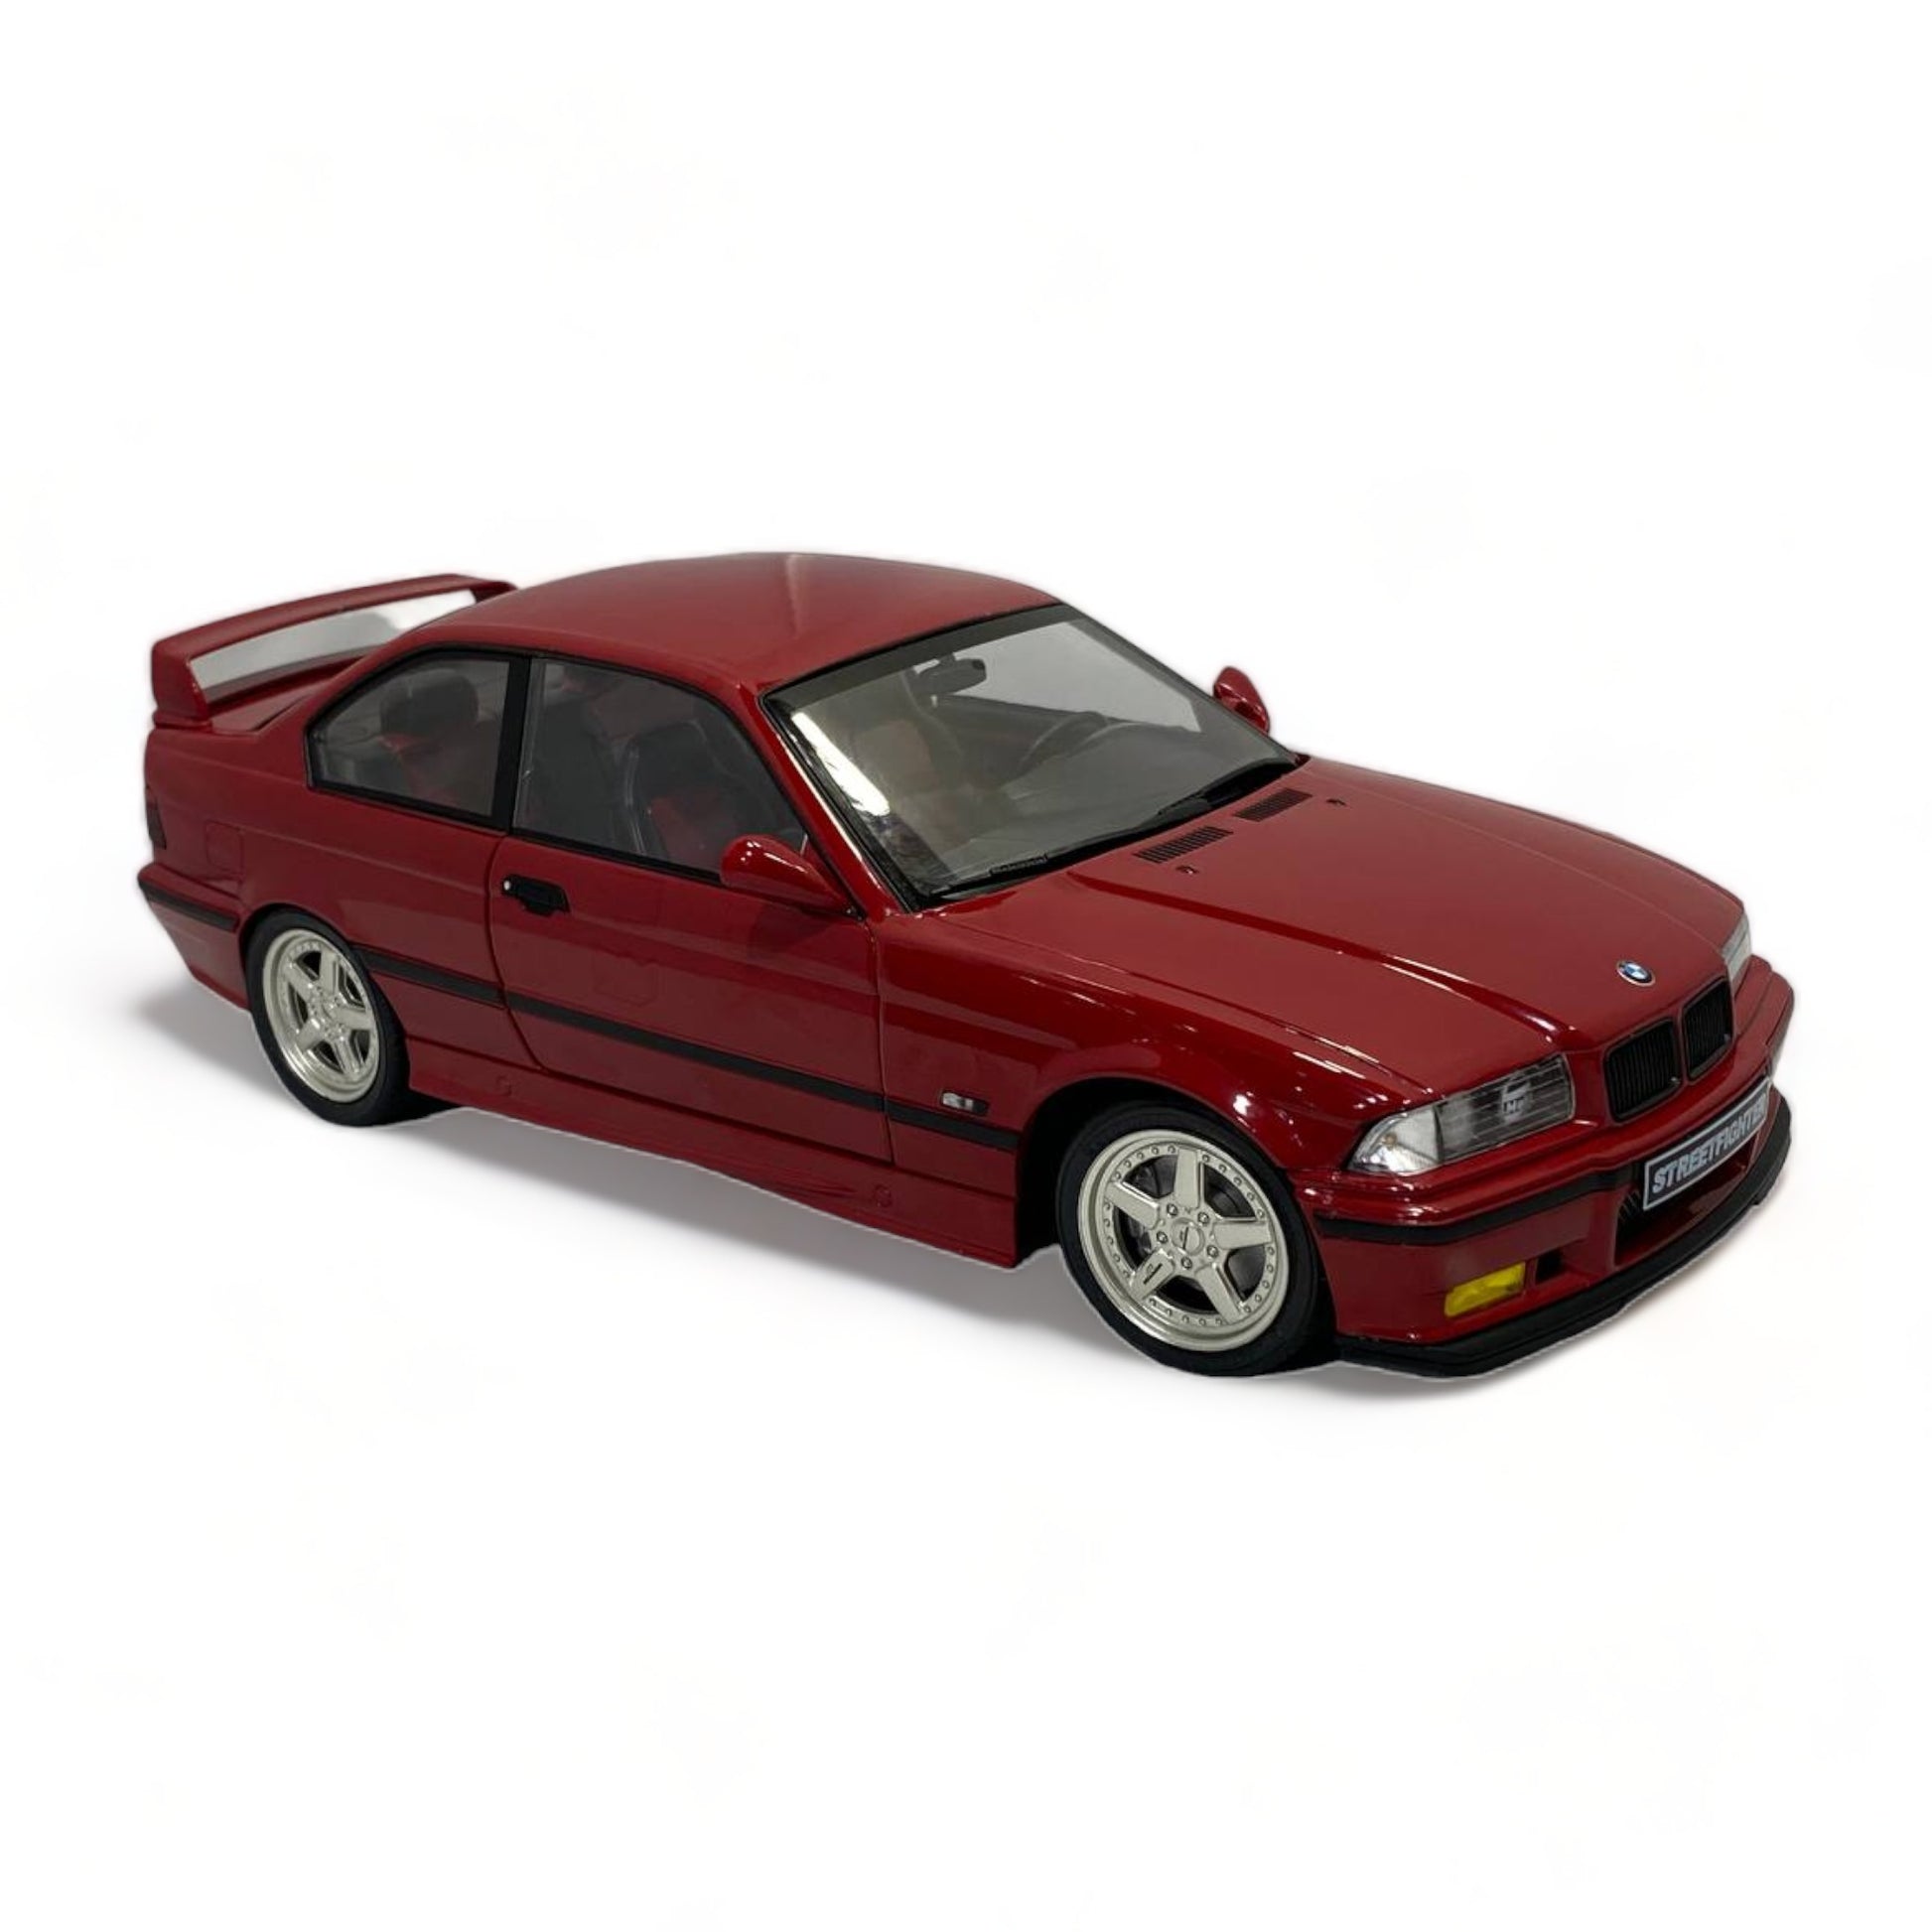 1/18 Diecast BMW M3 E36 Coupe street fighter Red by Solido Model Car|Sold in Dturman.com Dubai UAE.